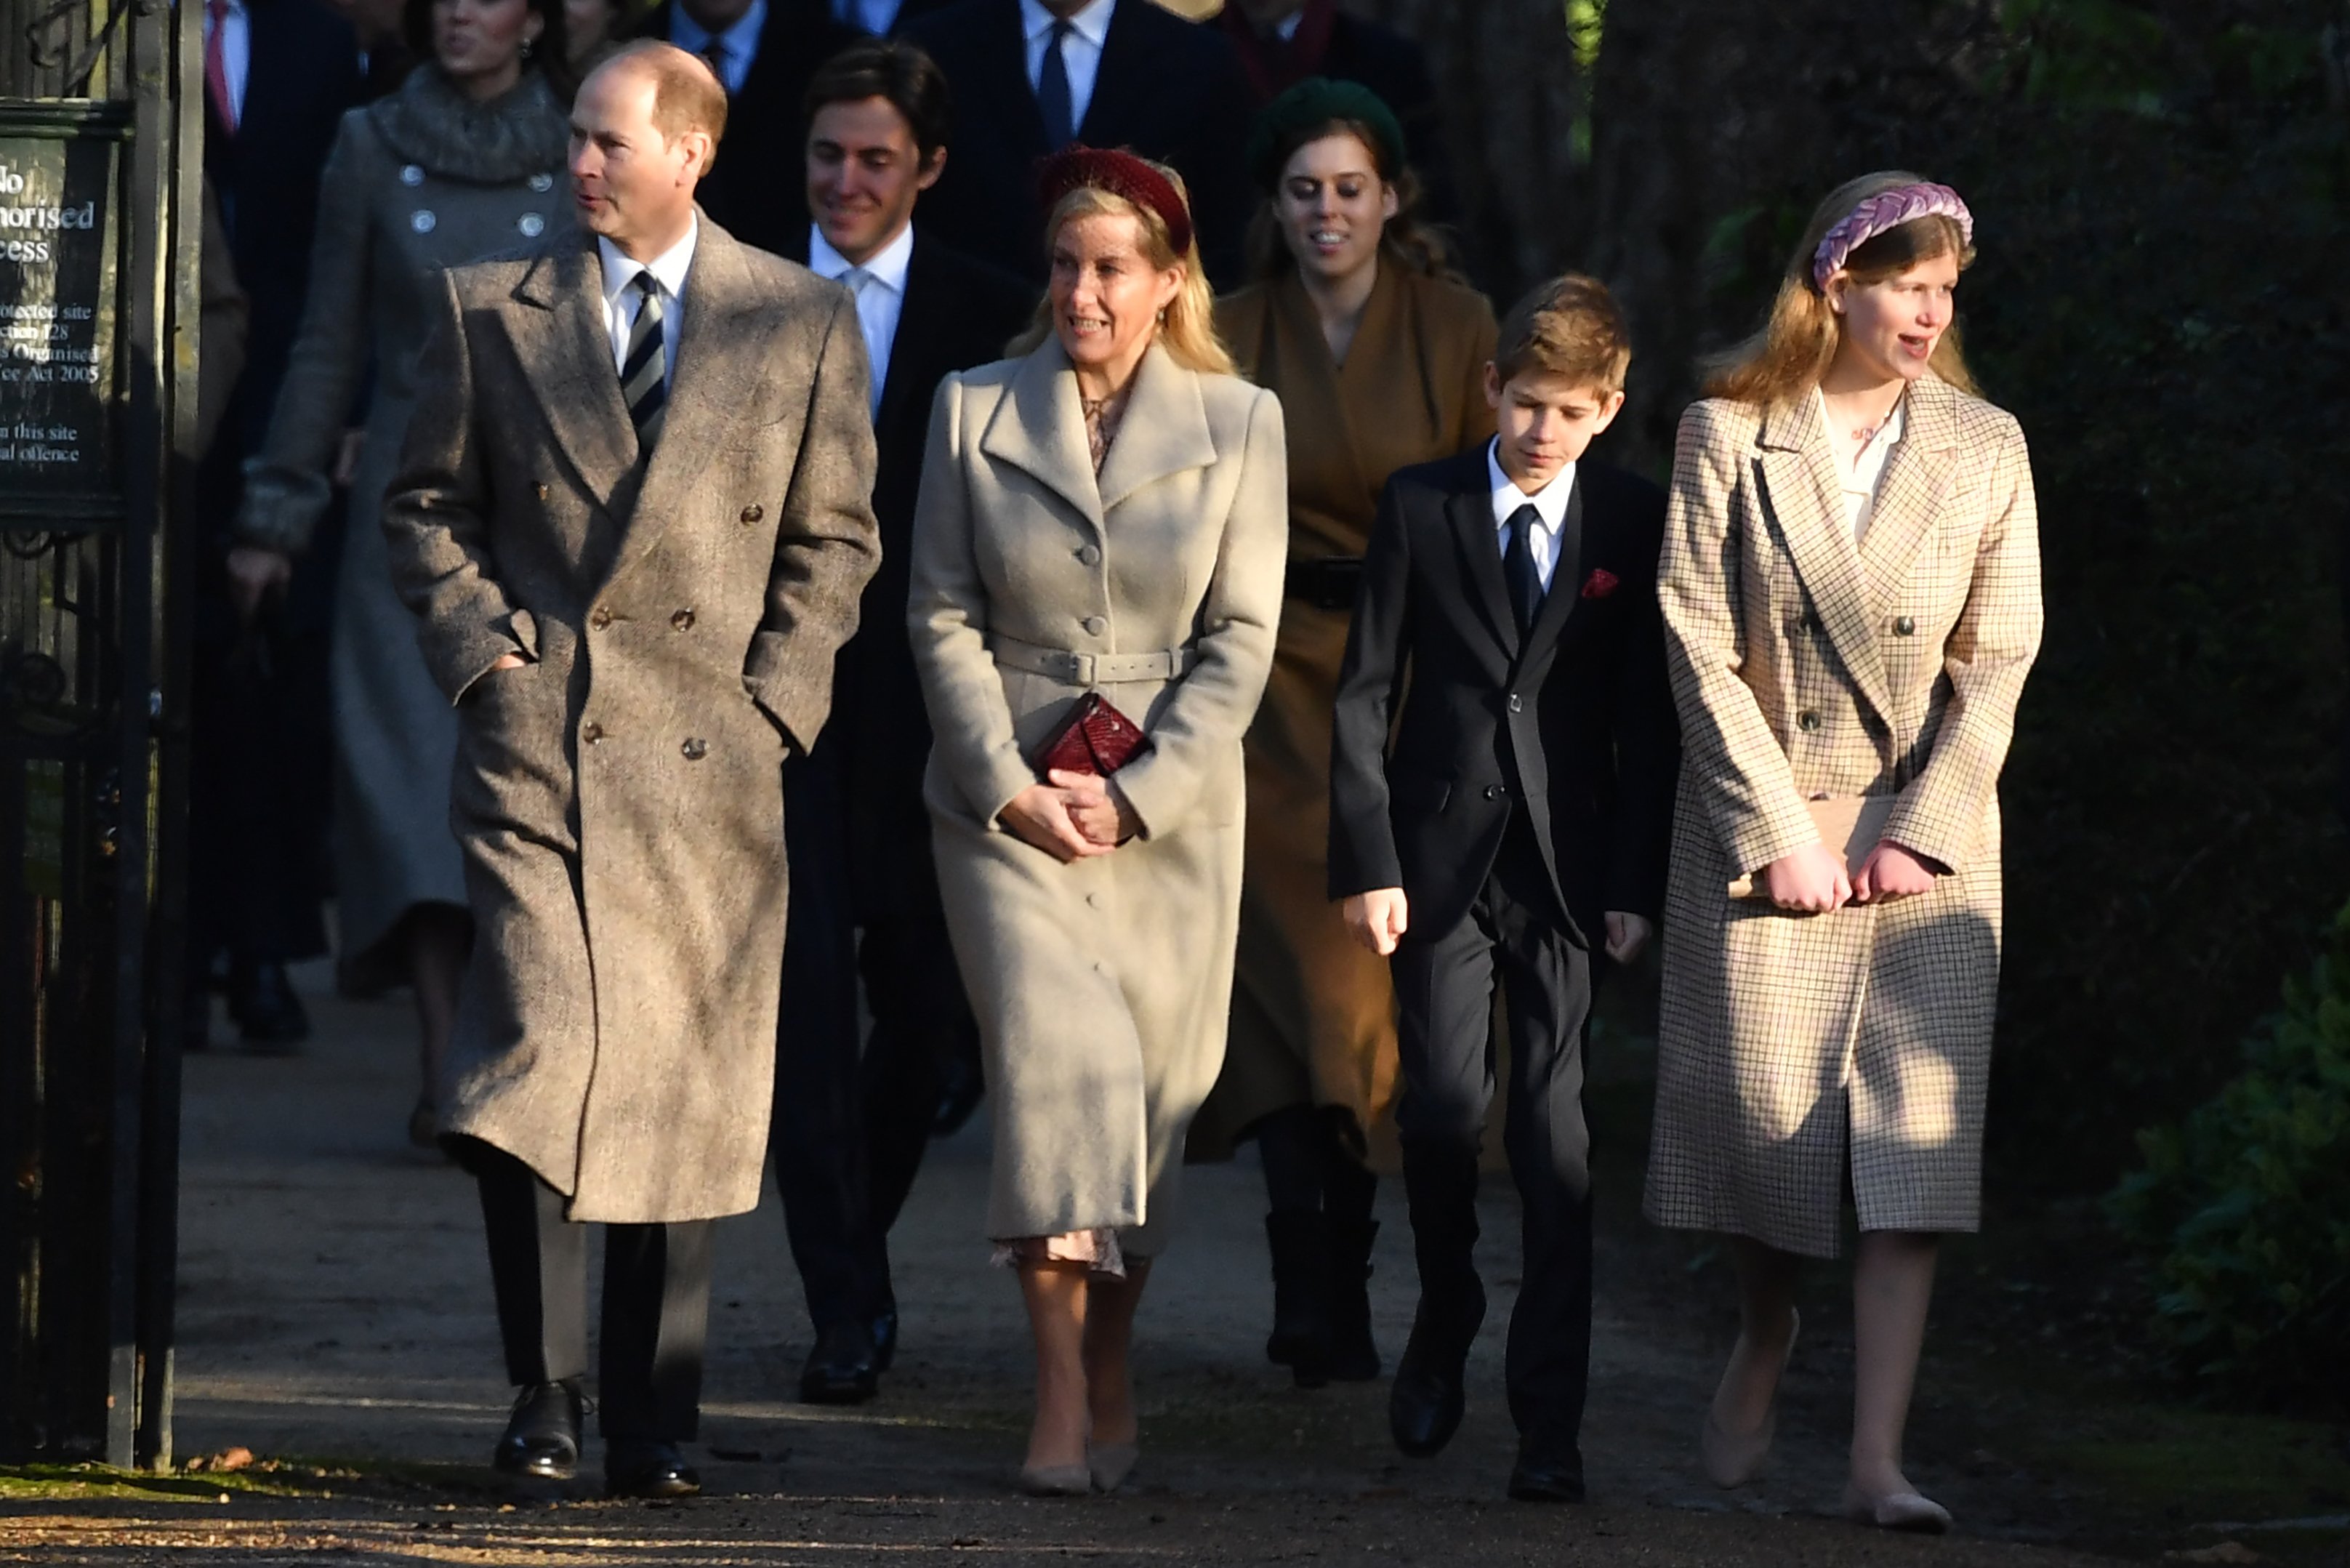 Prince Edward, Sophie, Countess of Wessex and their children Viscount Severn and Lady Louise Windsor arrive at St Mary Magdalene Church on December 25, 2019 in Sandringham, Norfolk, England┃Source: Getty Images 